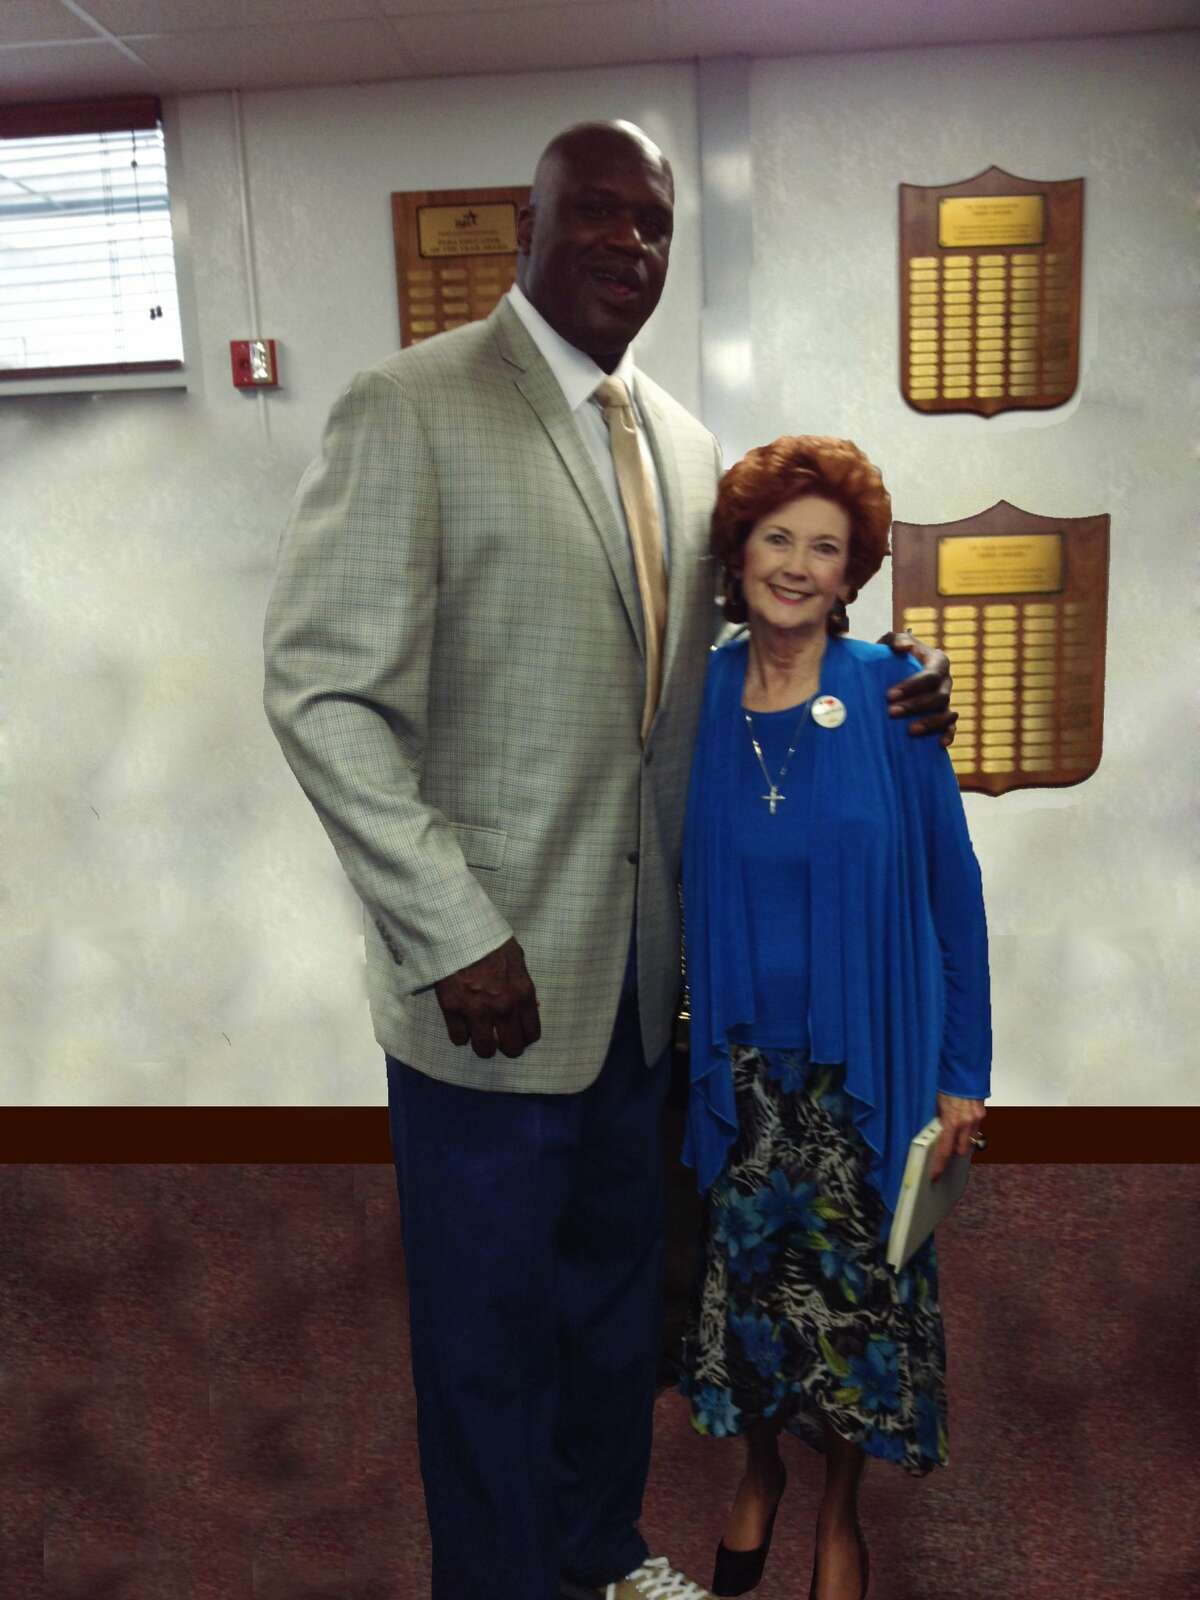 In 1989, shortly after the Cole High School boys basketball team posted a 36-0 record and won the 3A State Championship, Shaquille O'Neal took a photo with librarian Sandee Mewhinney. The Cole team was recently honored on the 25th anniversary of their perfect season at the State Basketball Tournament in Austin.